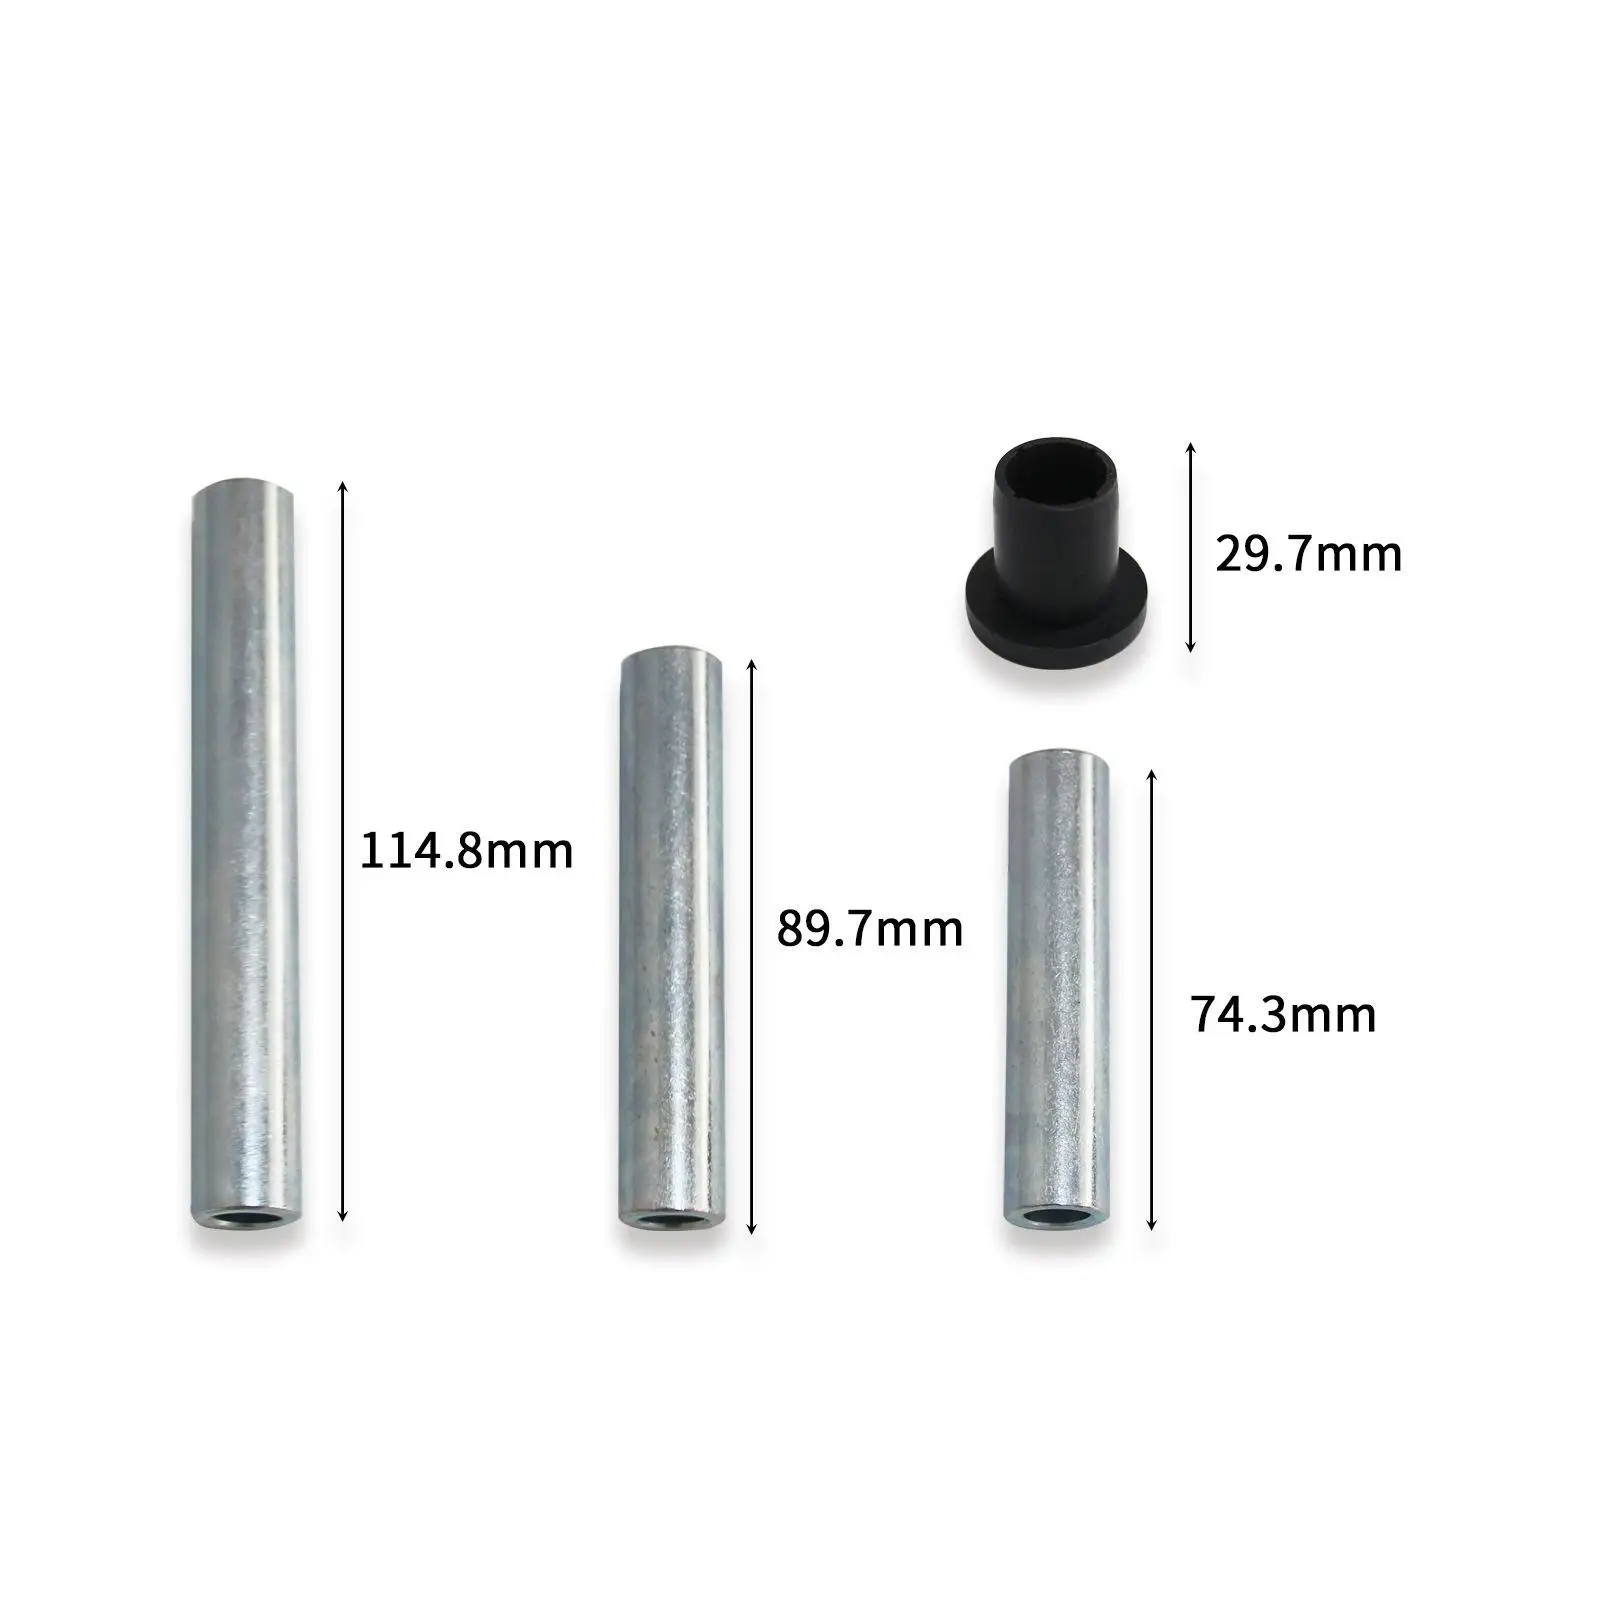 

UHMW A Arm Bushing Kit Replace Easy Installation Metal Low Wear Heavy Duty for Polaris Ranger XP 800 900 Diesel Accessories